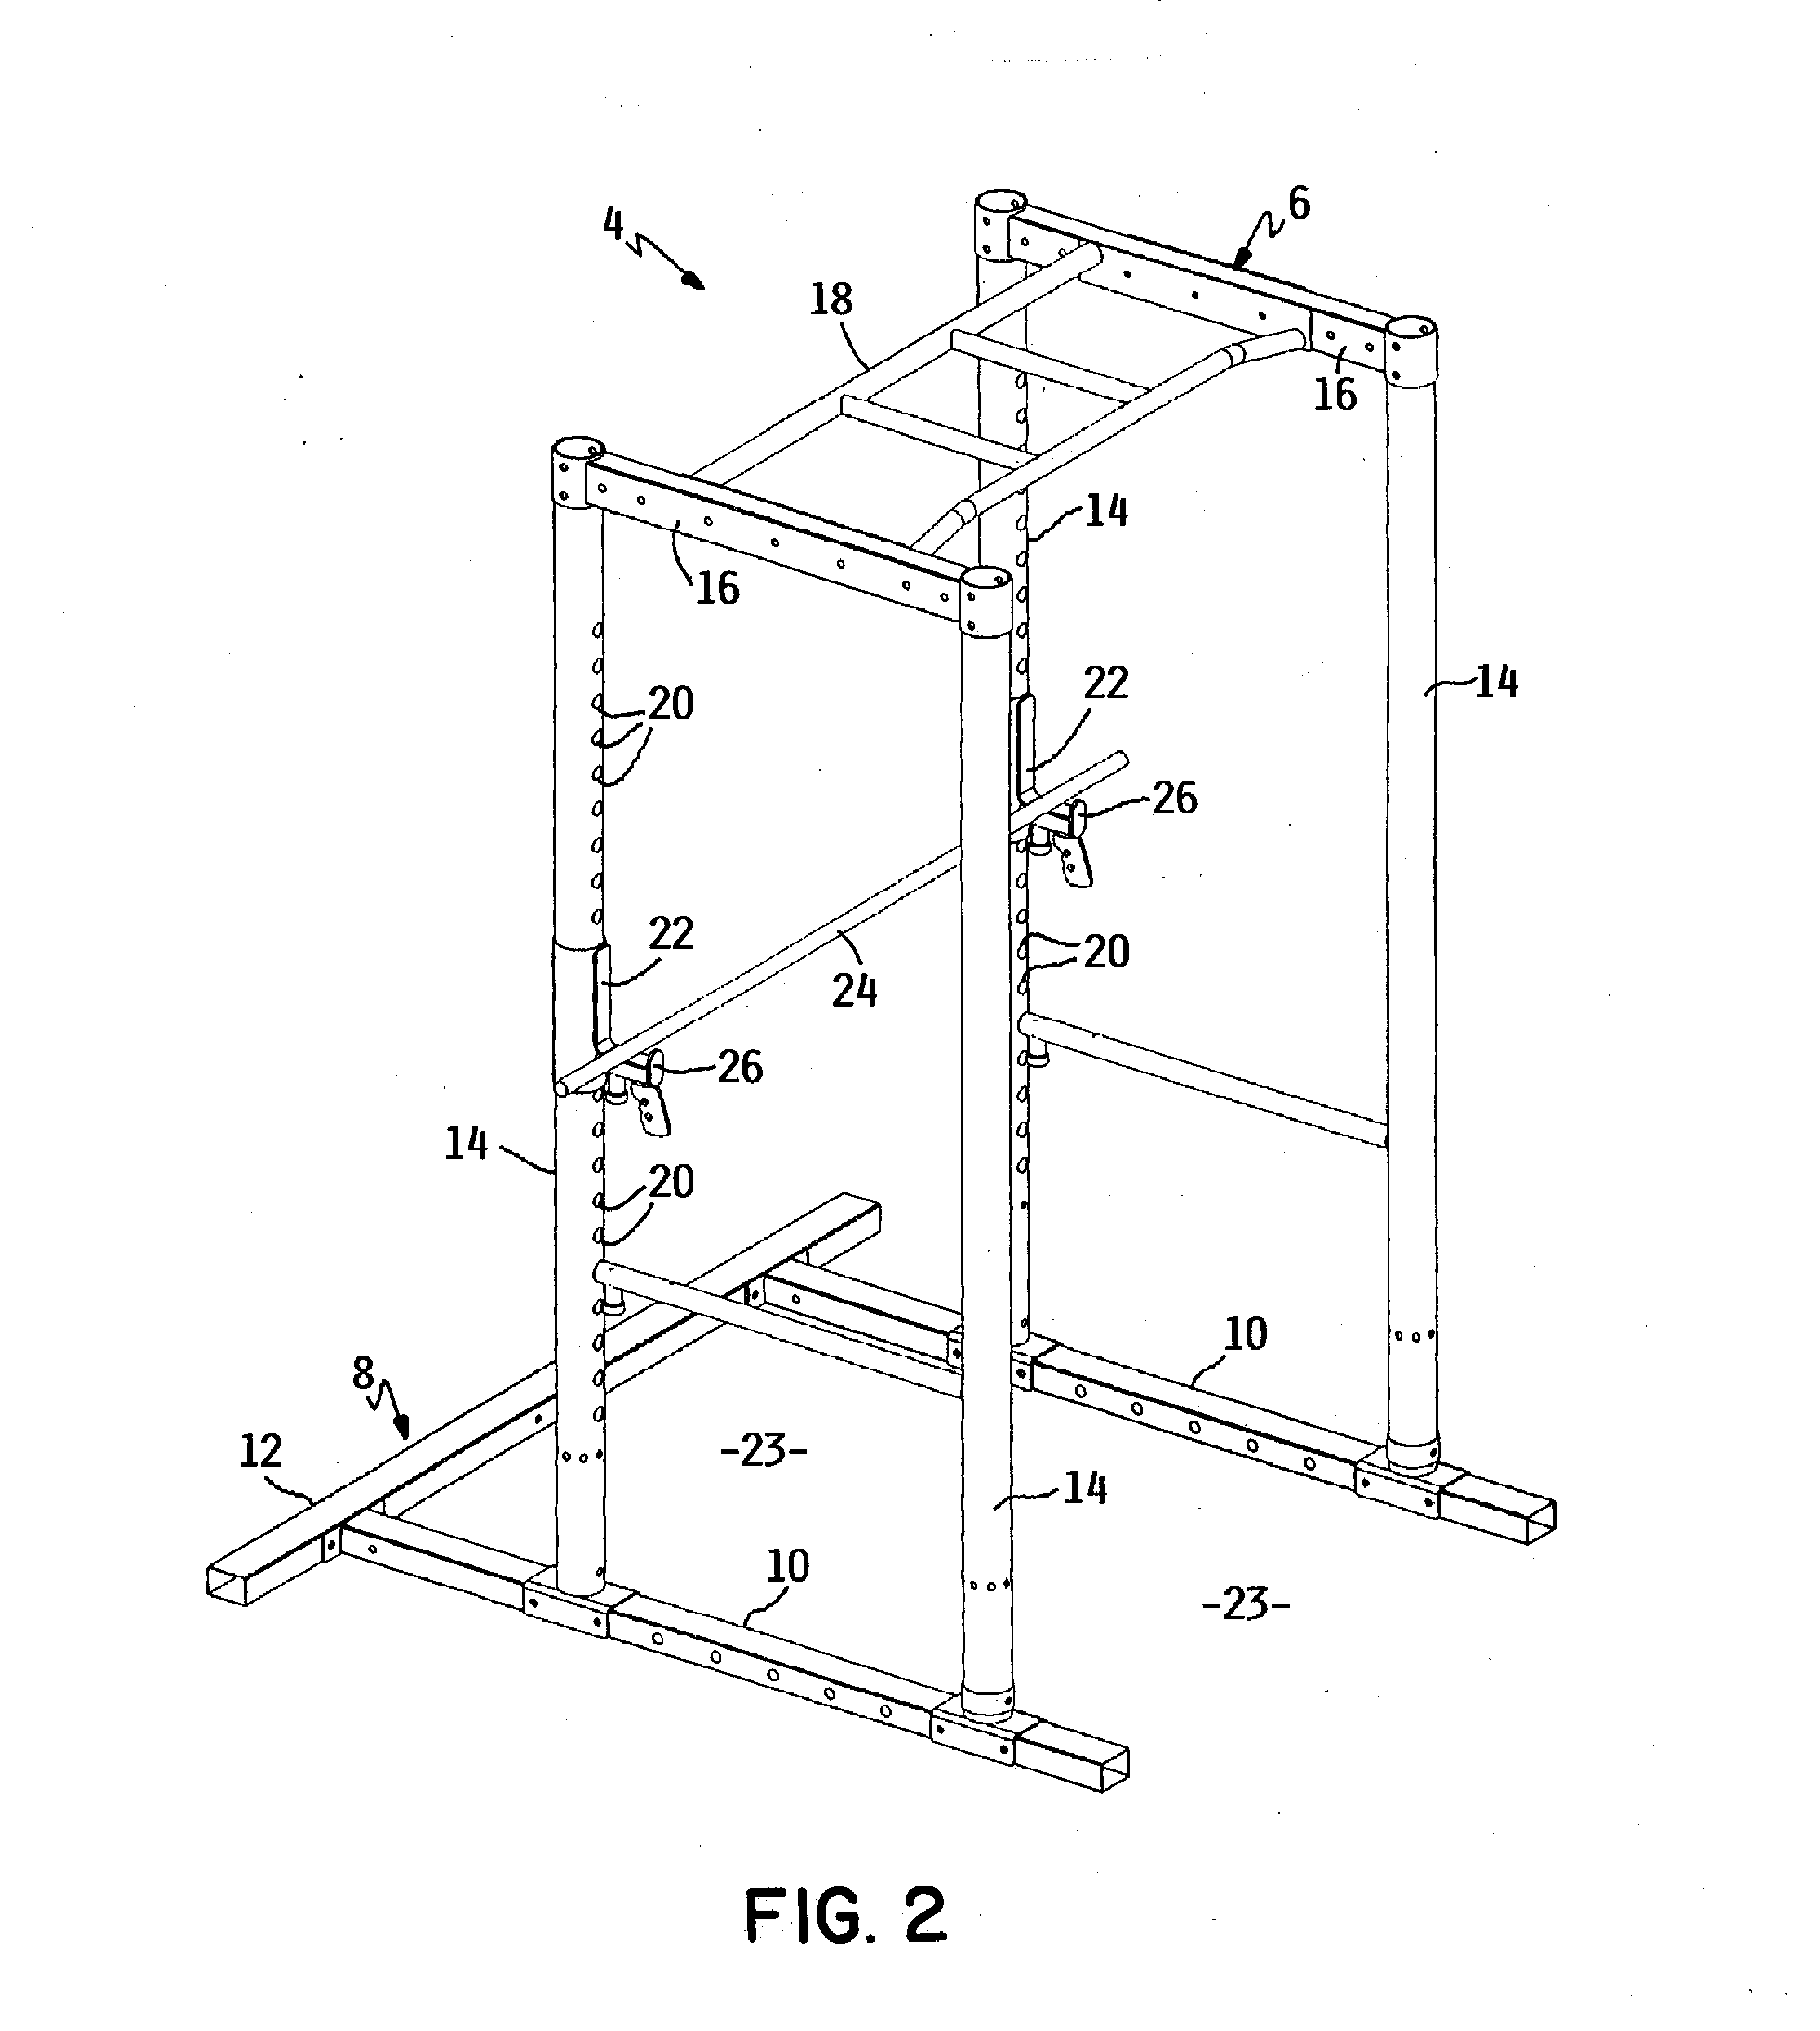 Exercise machine for providing weight lifting exercises similar to those provided by a free weight barbell